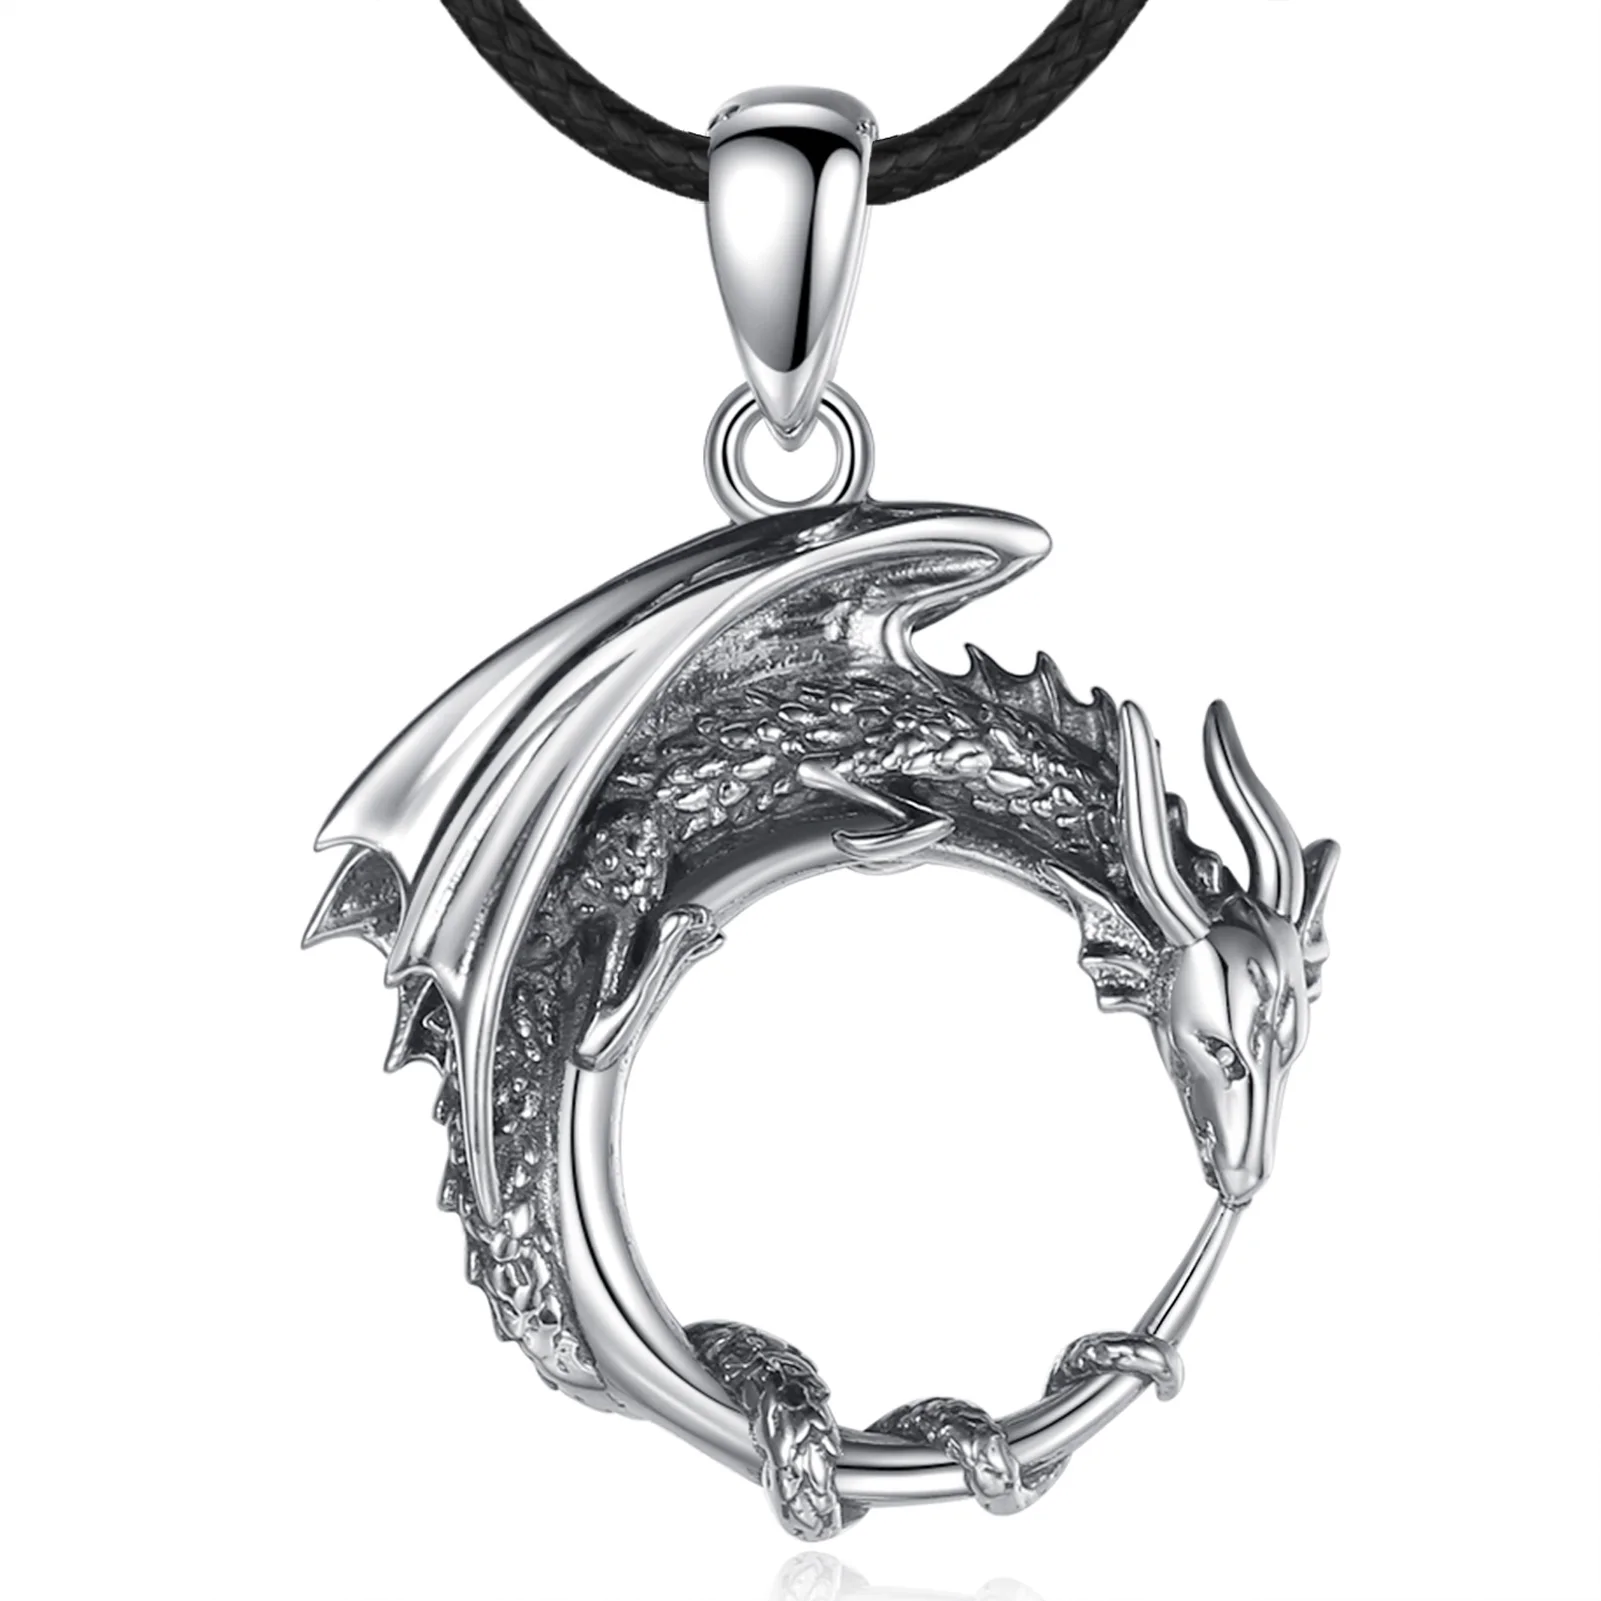 CLUCI Silver 925 Dragon Charms Pendant Jewelry for Women Real 925